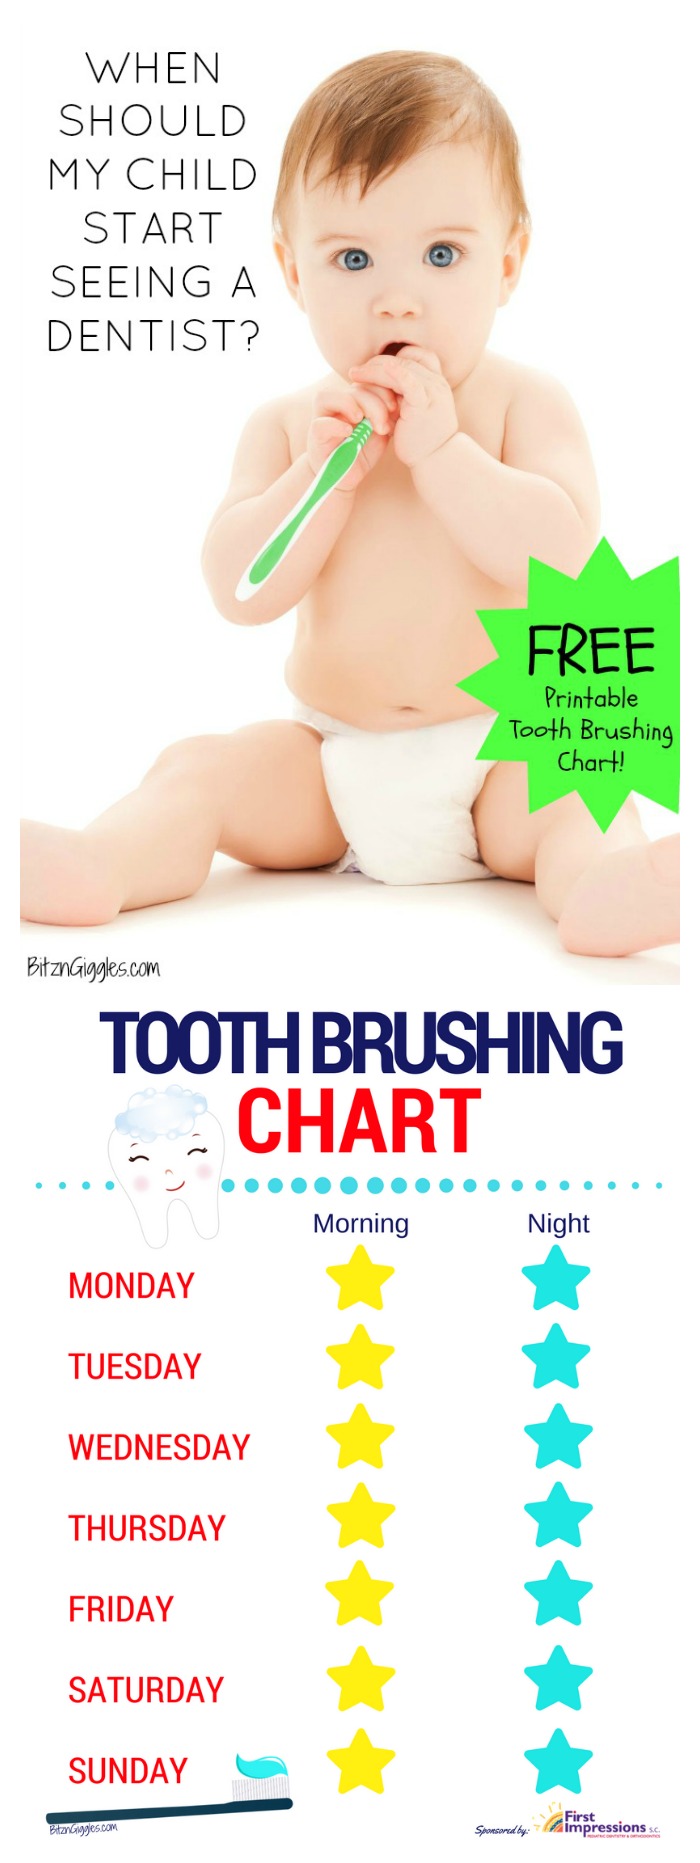 When Should My Child Start Seeing a Dentist? - Tips on caring for your child's teeth and a free printable tooth brushing chart to make brushing fun and part of their daily routine!